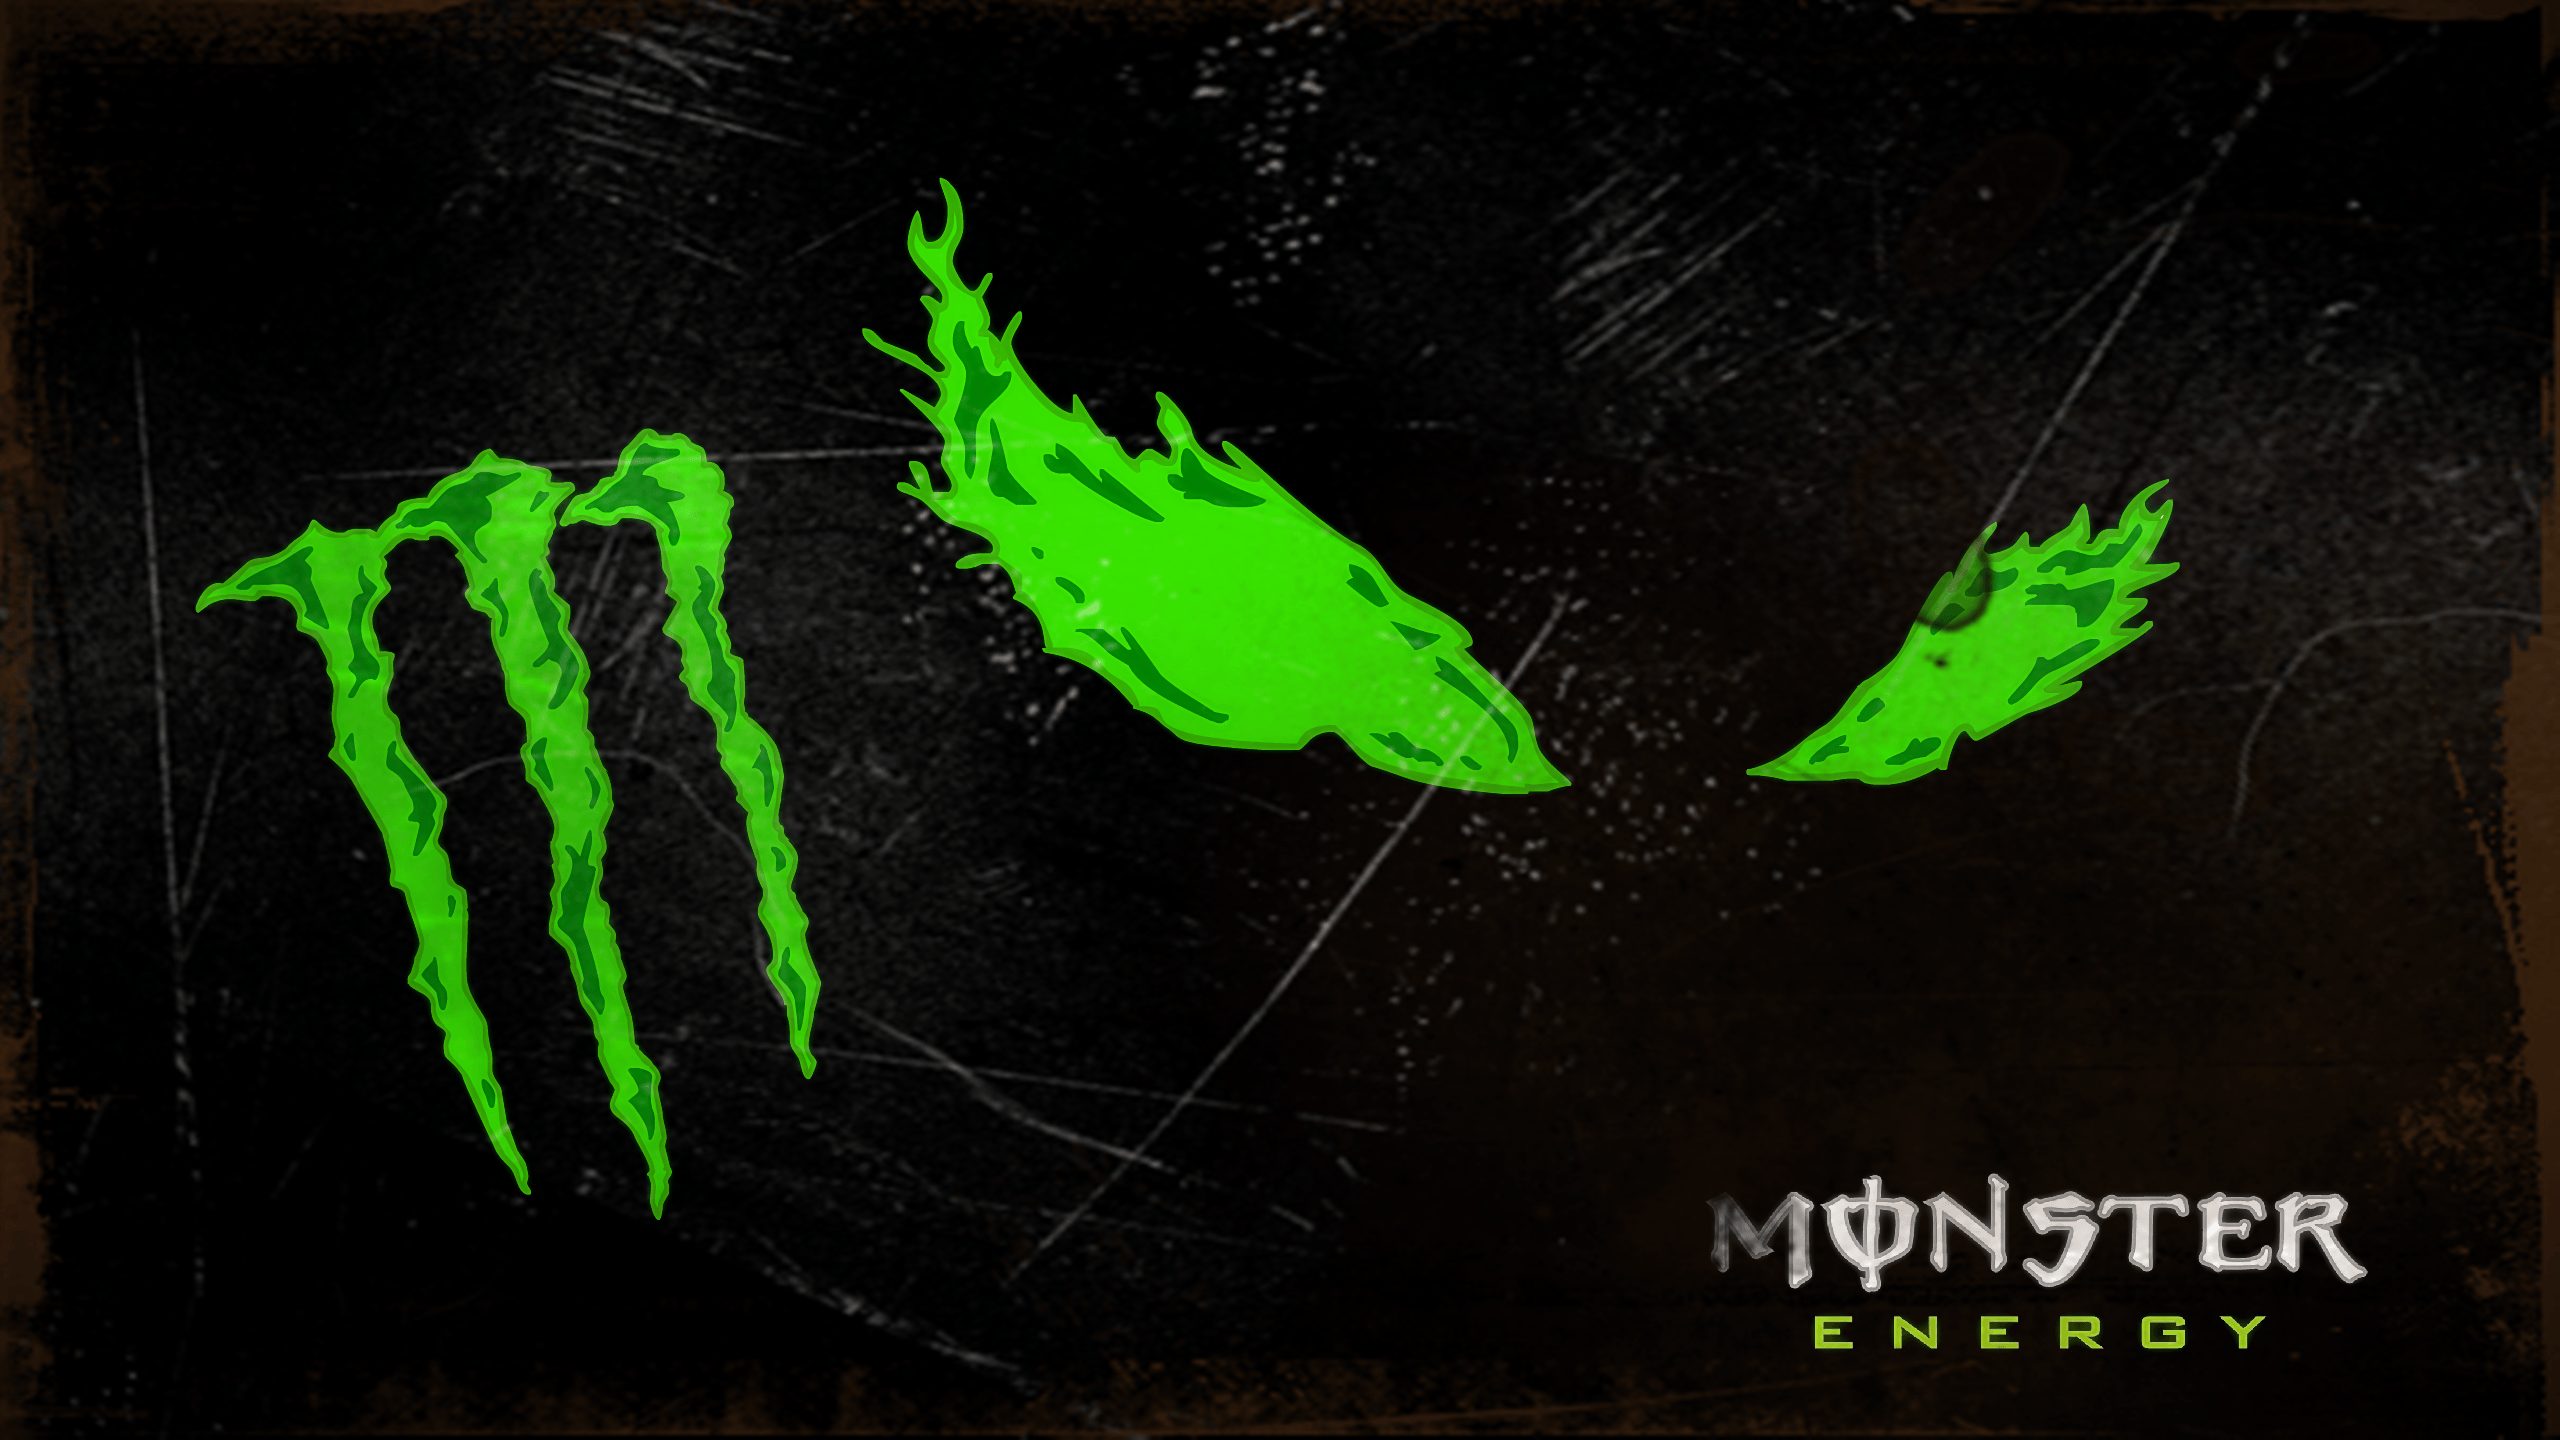 Cool Fox and Monster Logo - Amazing Monster Energy Eyes High Quality In HD Wallpaper. WALLSEV